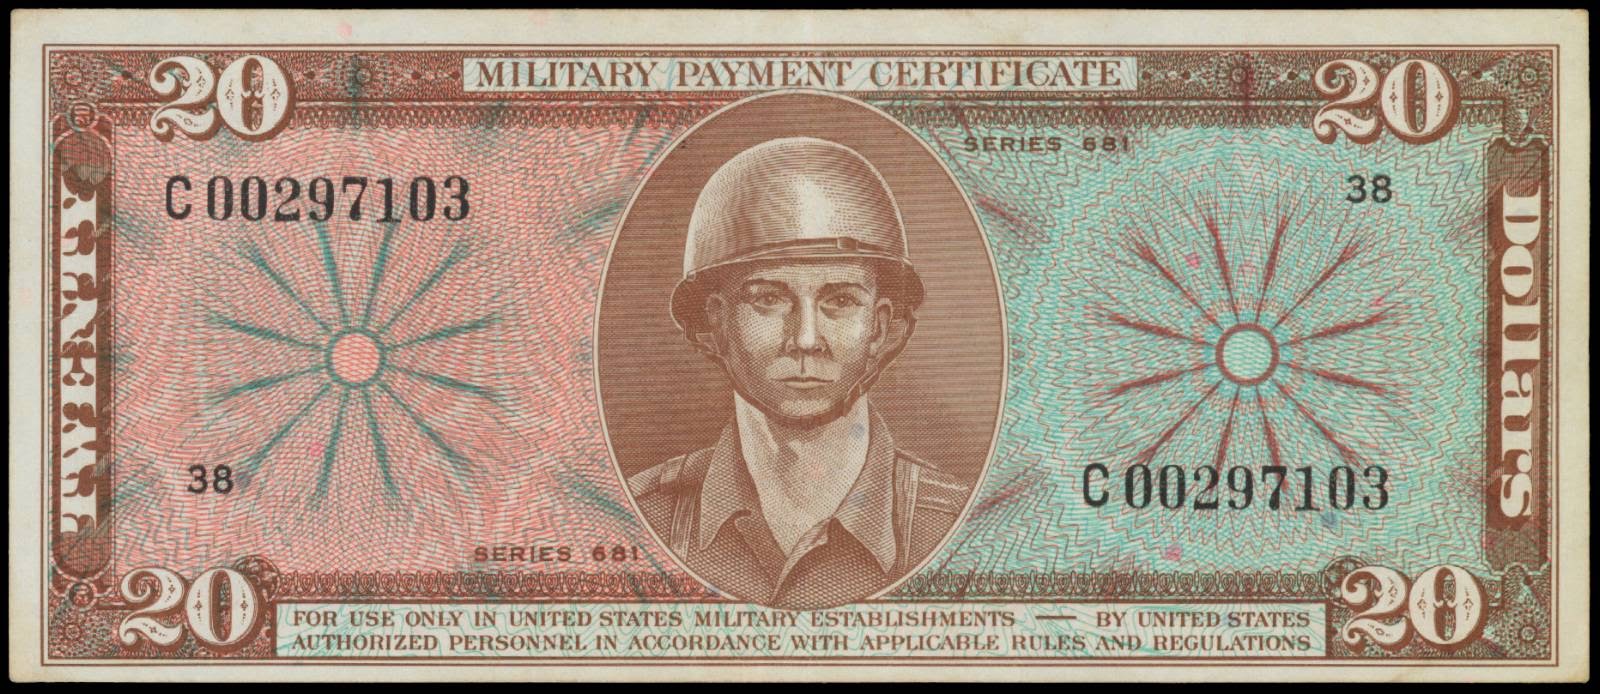 Military Payment Certificate 20 Dollars MPC Series 681